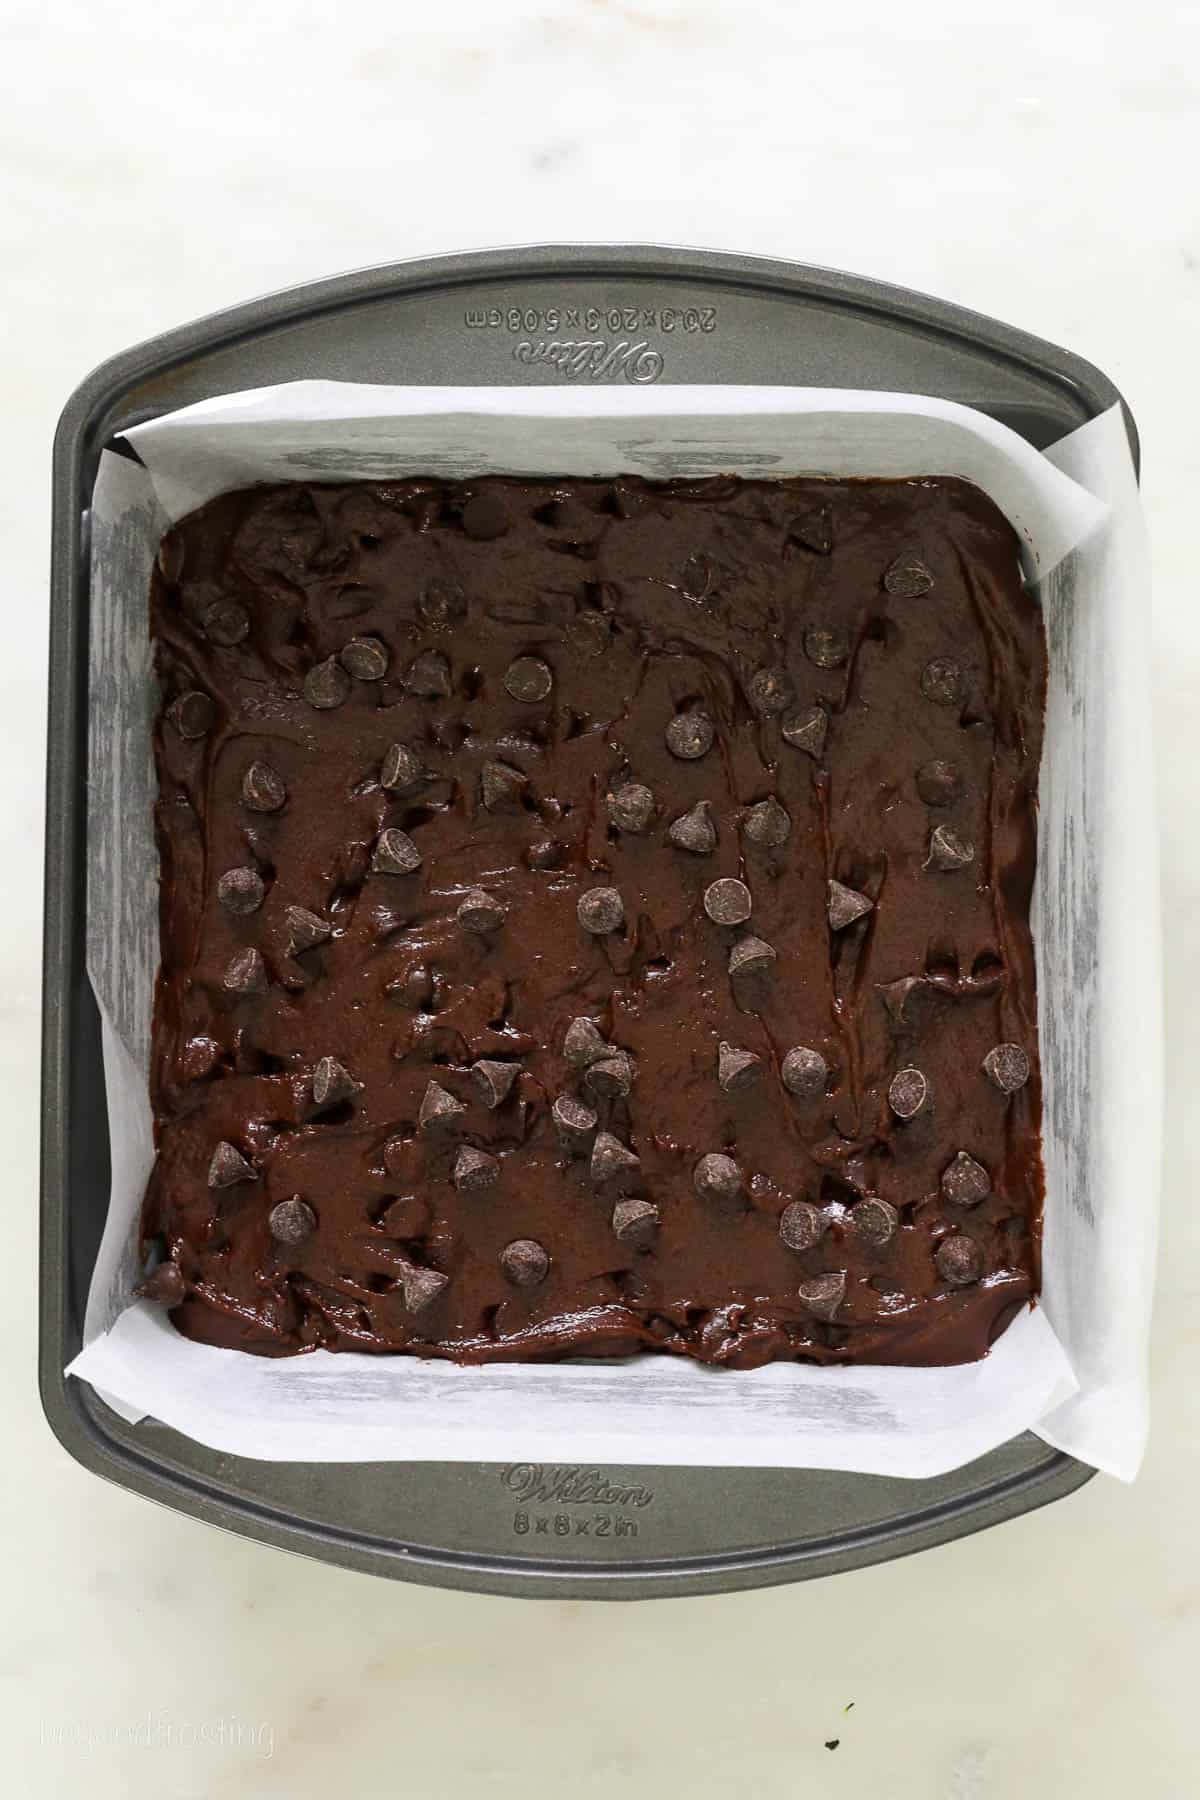 8-inch baking pan filled with brownie batter